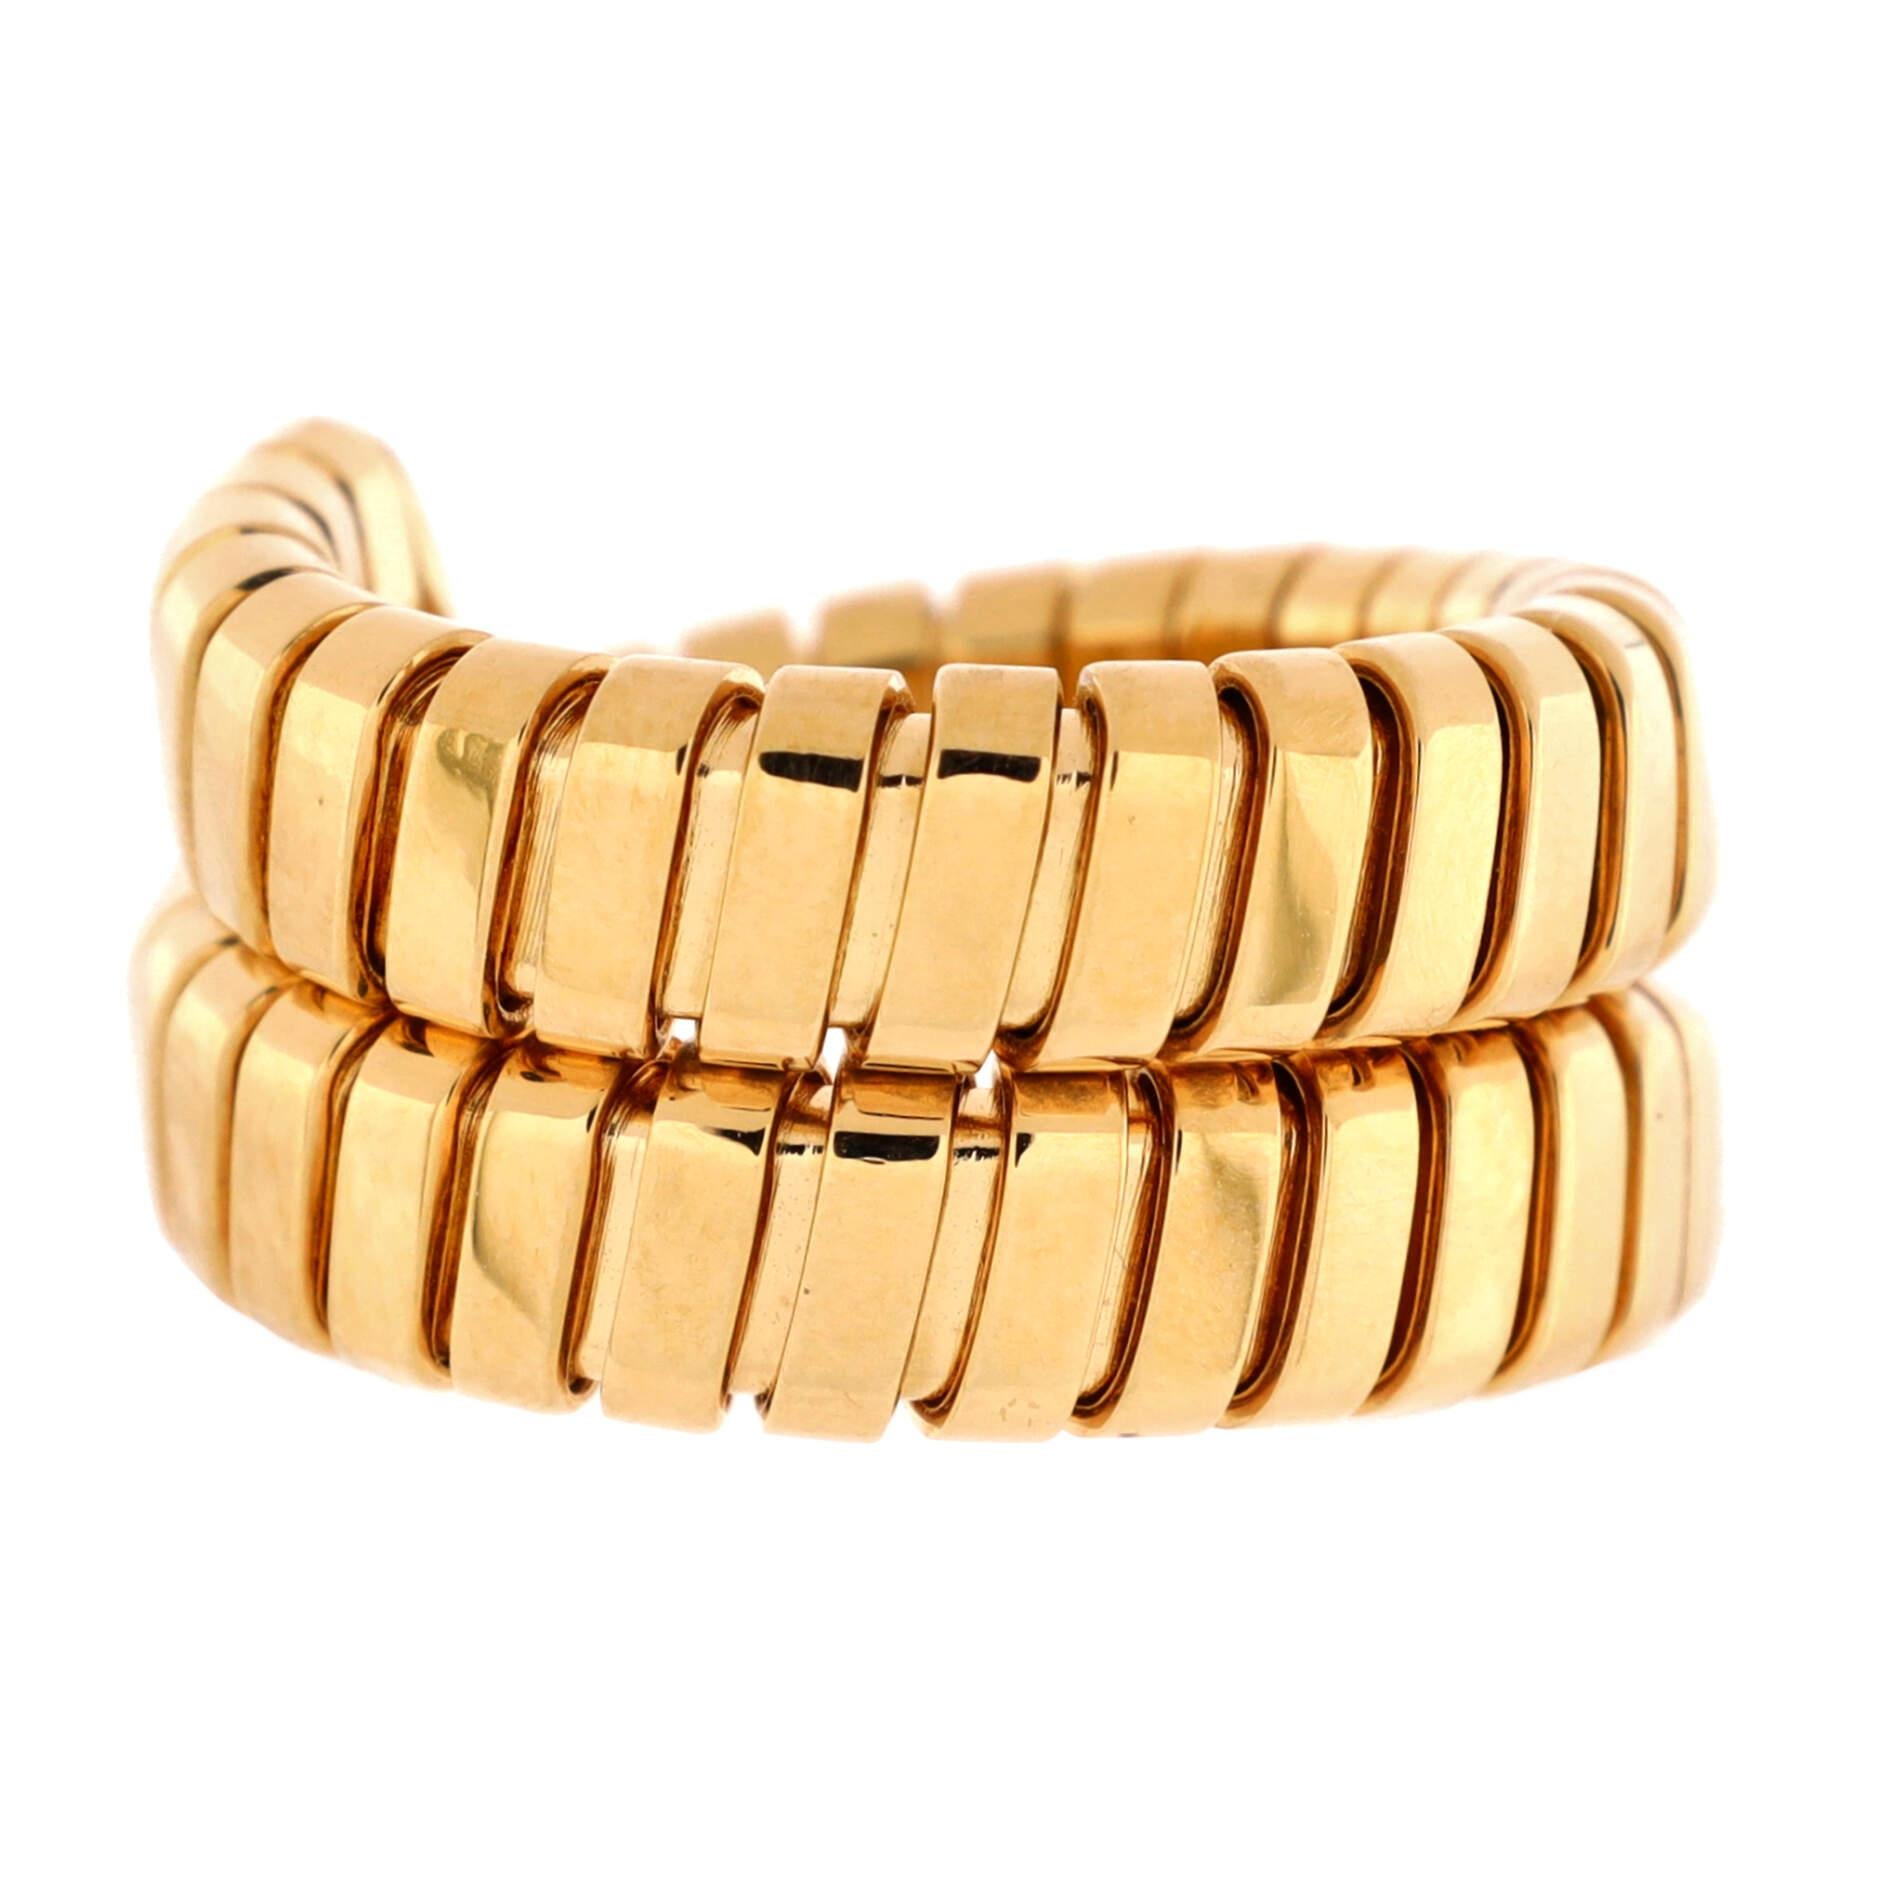 Condition: Great. Minor wear throughout.
Accessories: No Accessories
Measurements: Size: 6 - 52, Width: 5.65 mm
Designer: Bvlgari
Model: Serpenti Tubogas Single Wrap Ring 18K Yellow Gold
Exterior Color: Yellow Gold
Item Number: 209991/15